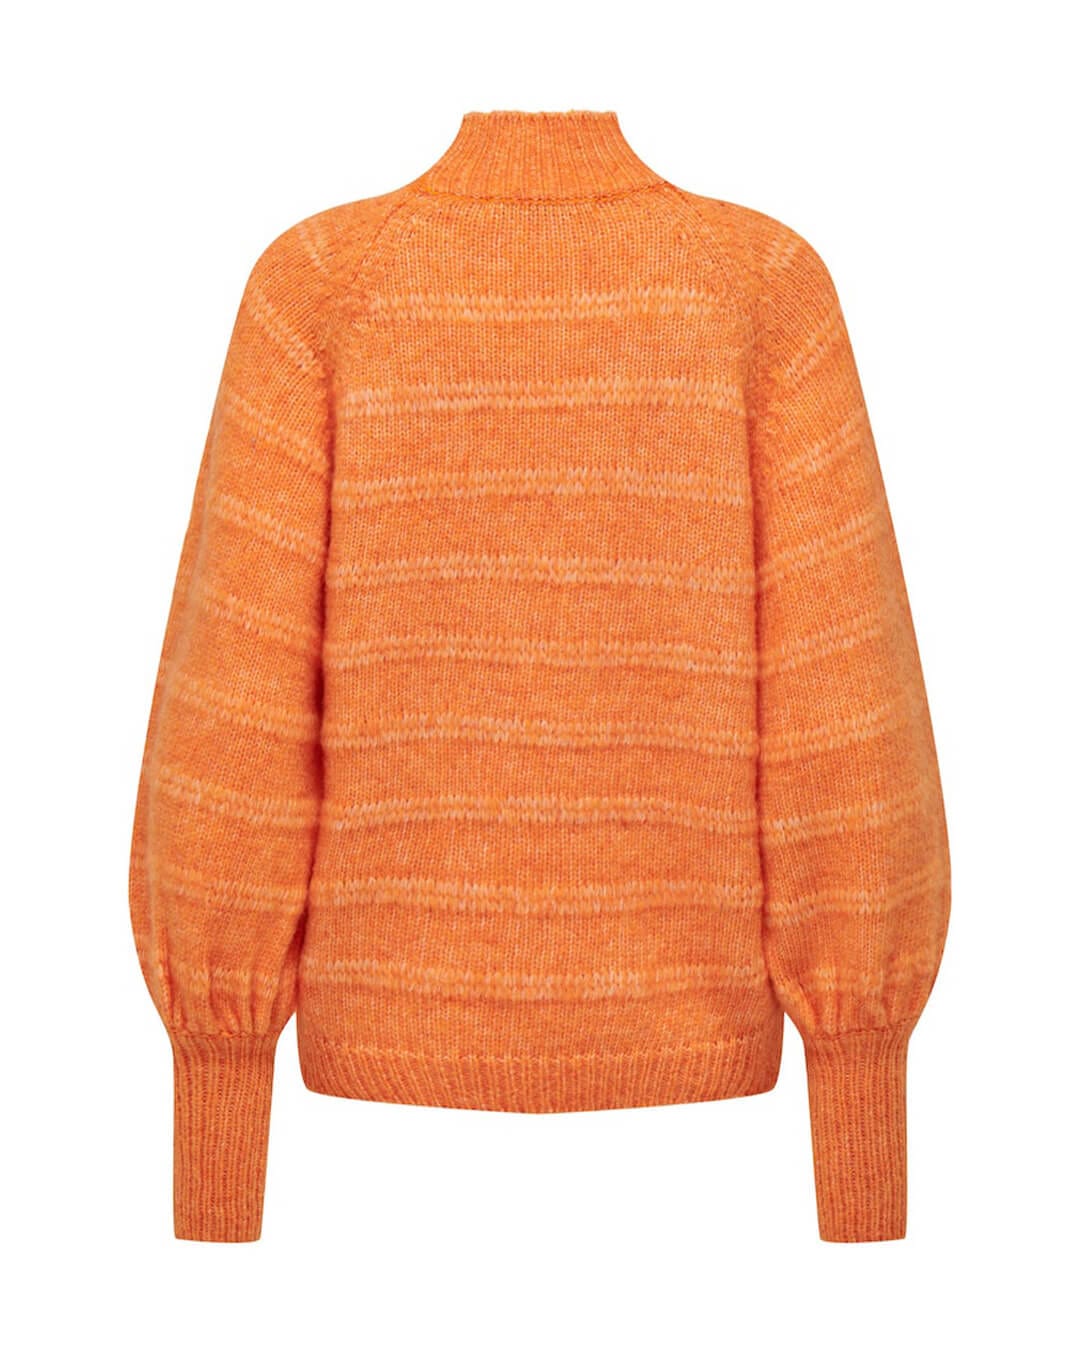 Only Jumpers Only Orange Balloon Sleeve Jumper